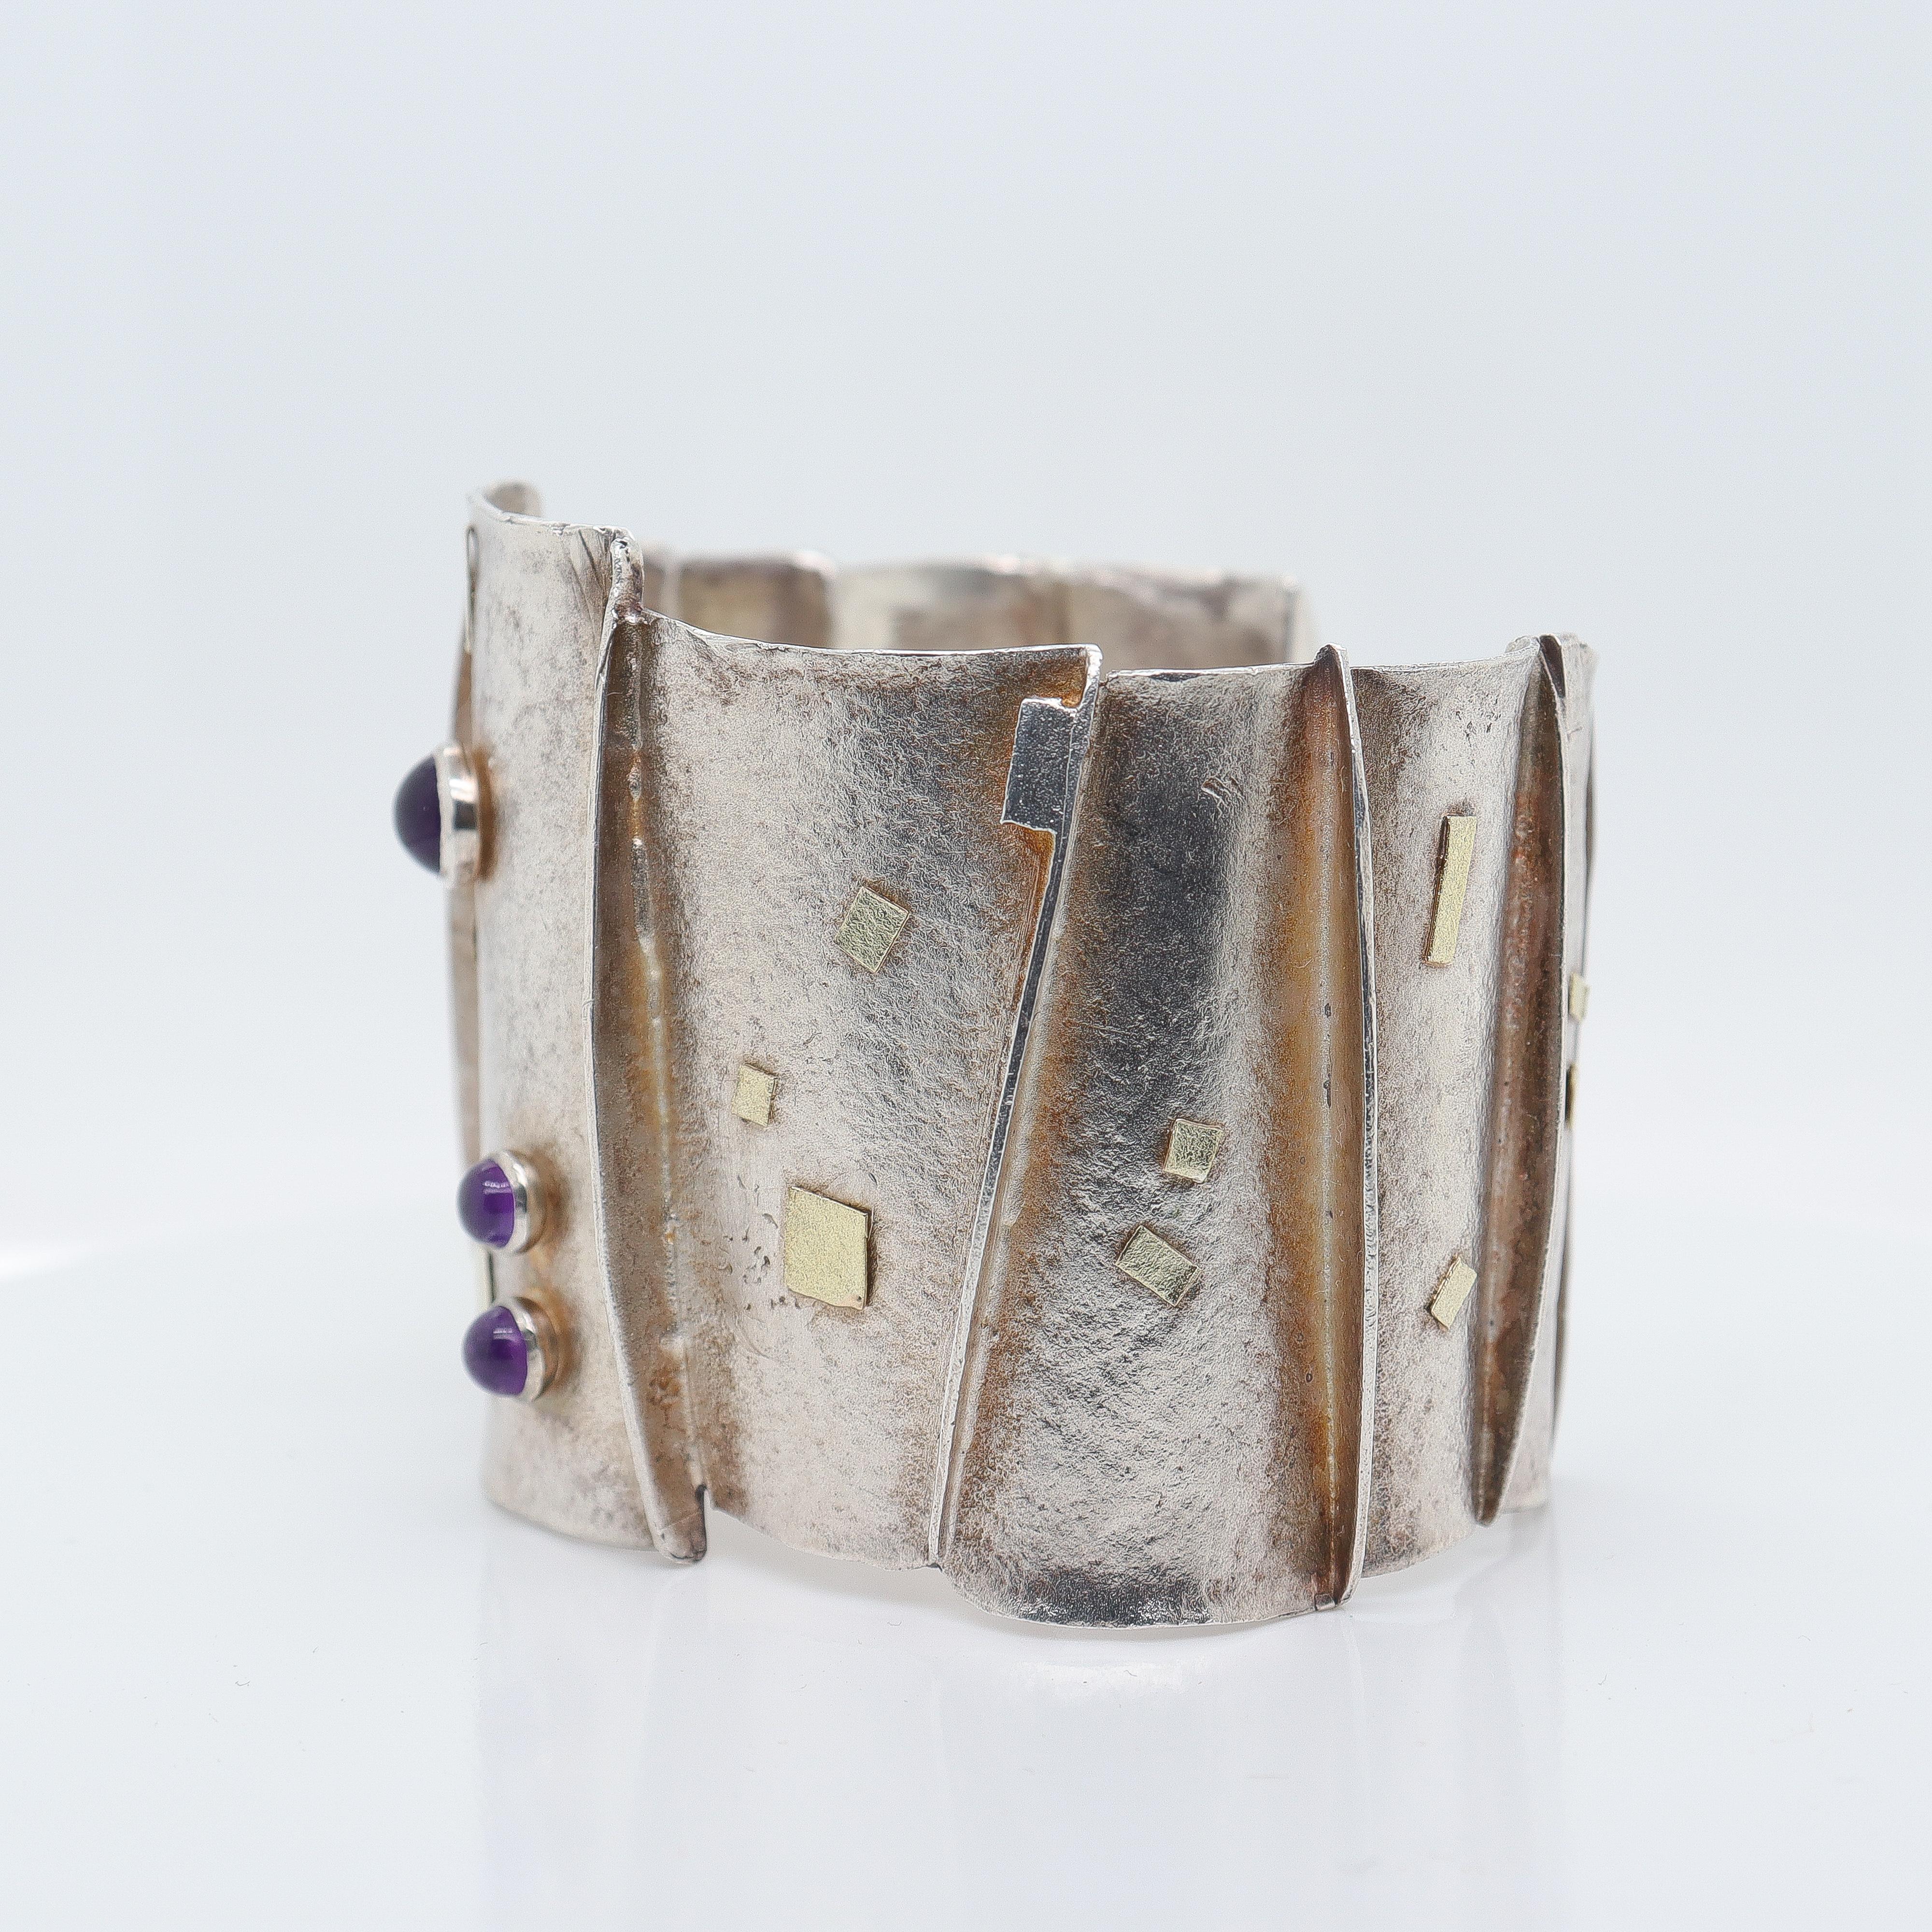 Women's Modernist Silver, Gold, & Amethyst Cuff Bracelet Attributed to Enid Kaplan For Sale